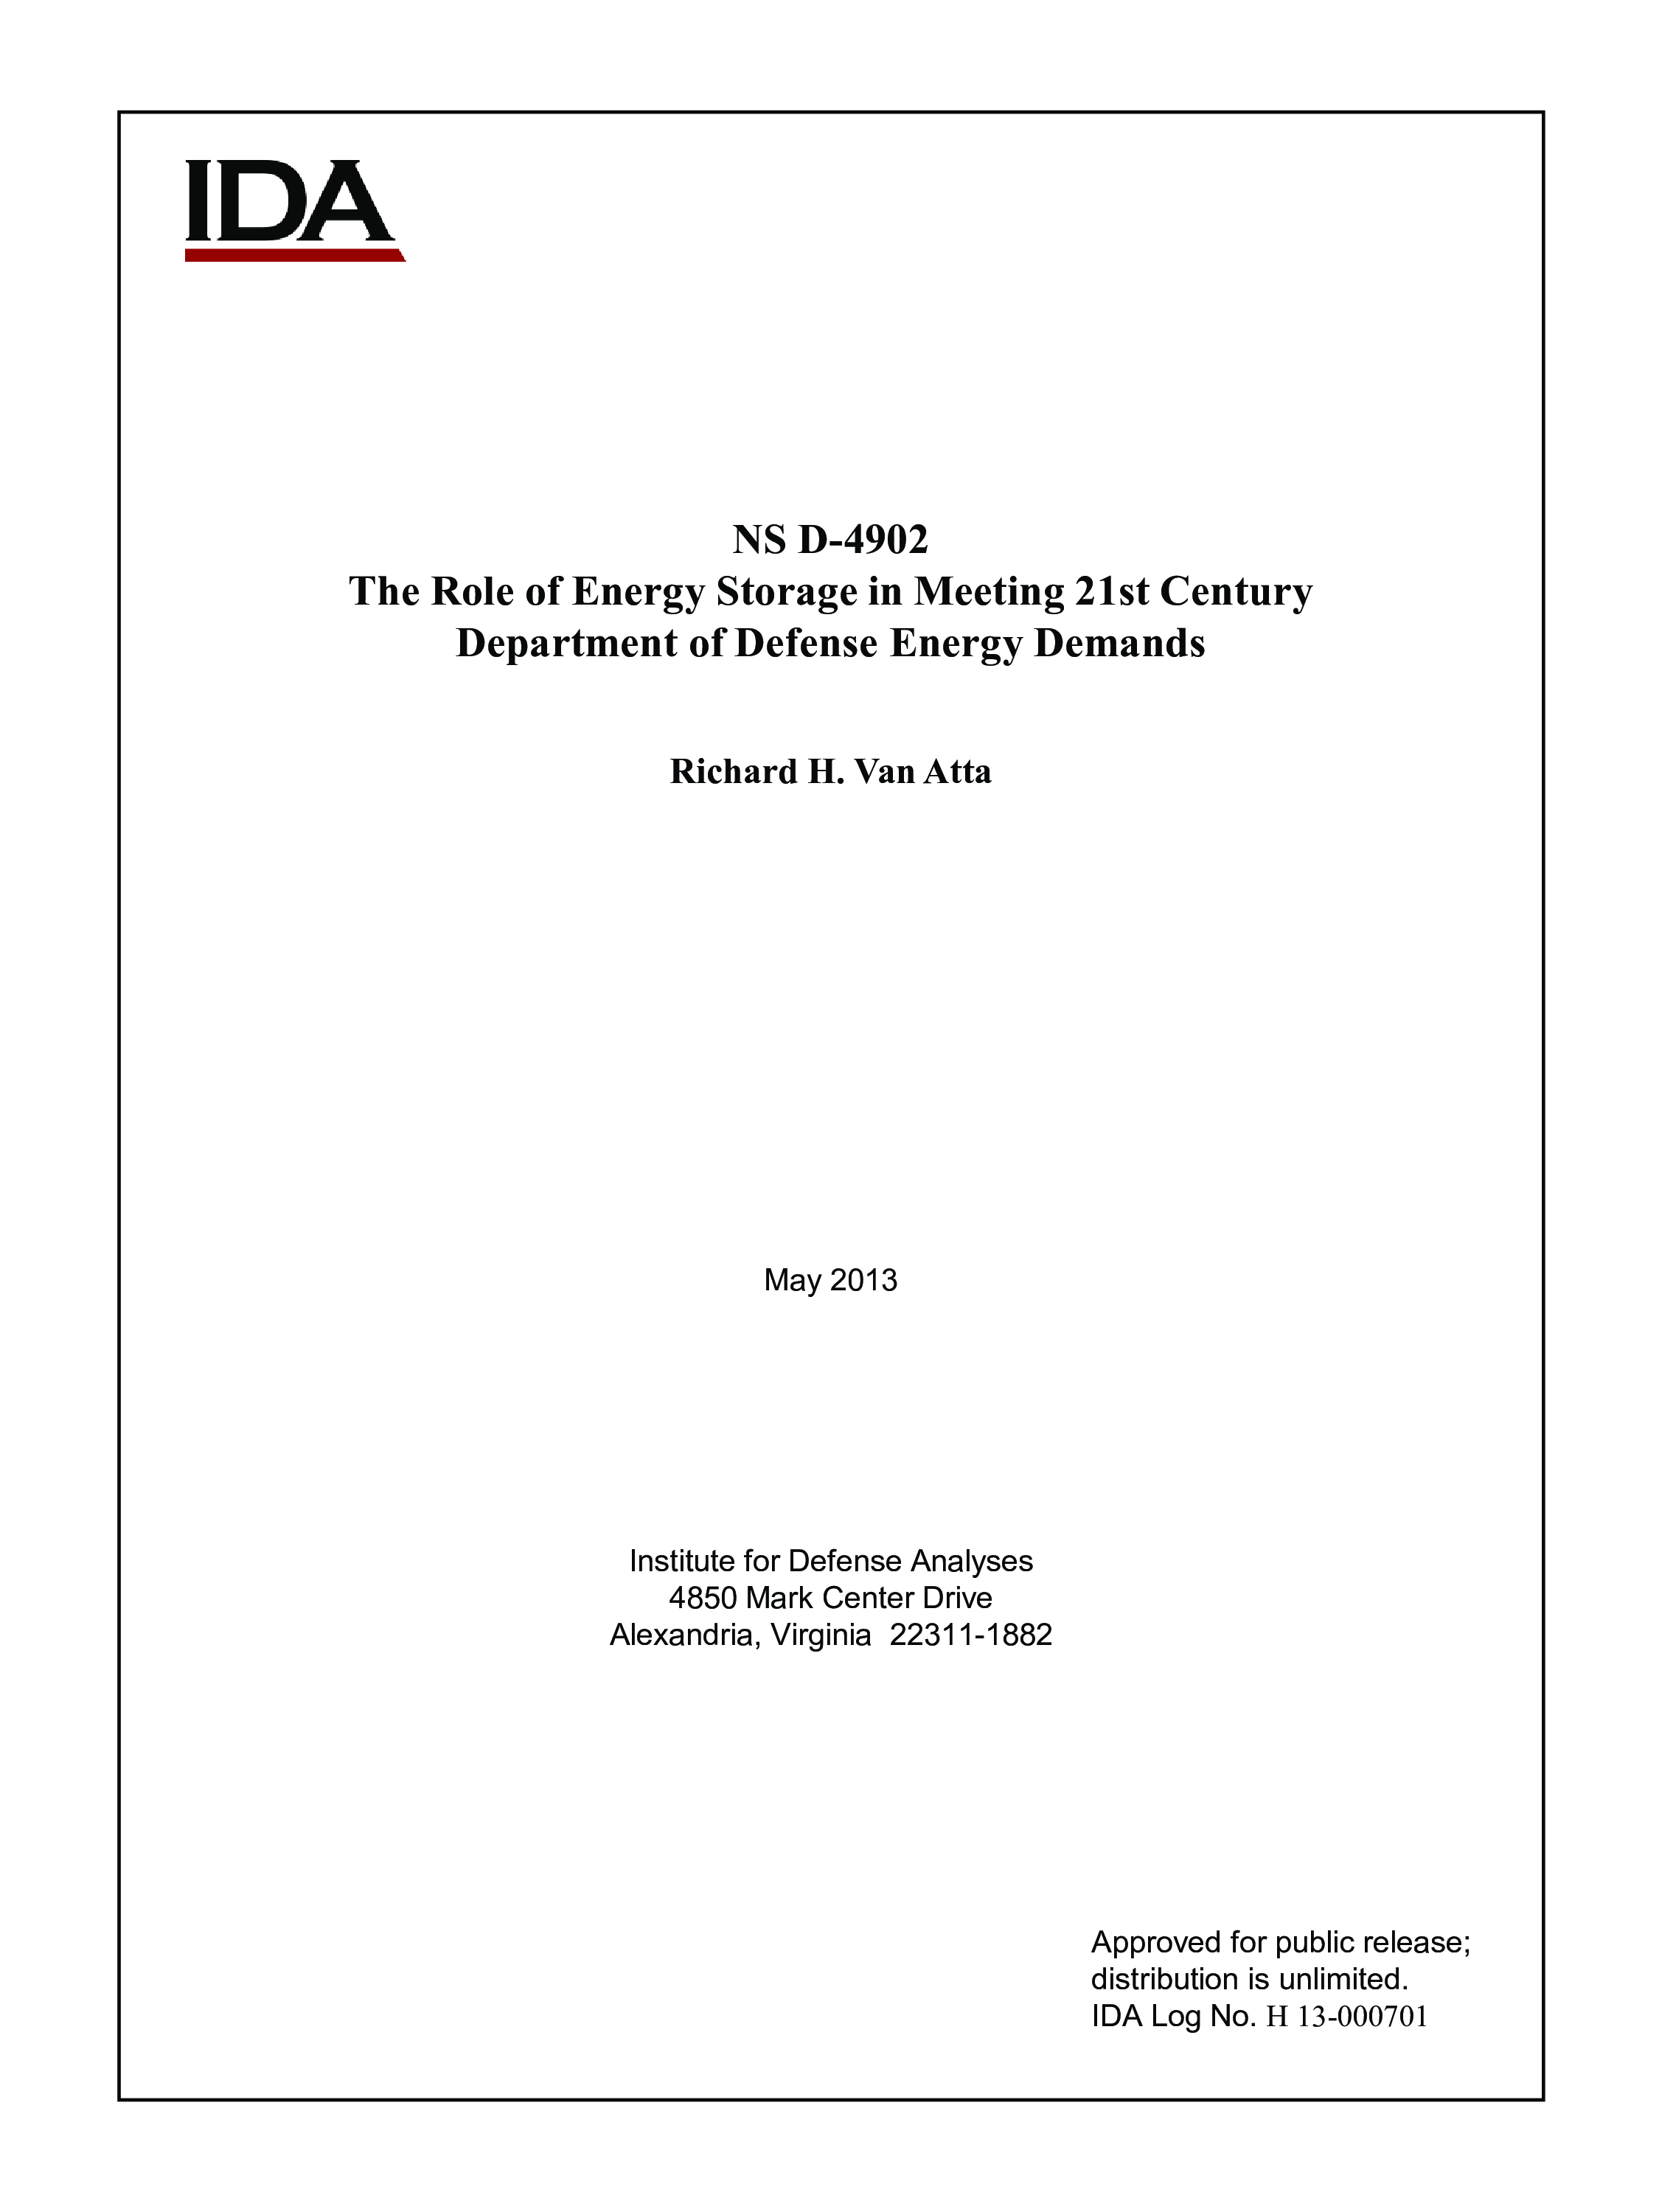 The Role of Energy Storage in Meeting 21st Century Department of Defense Energy Demands